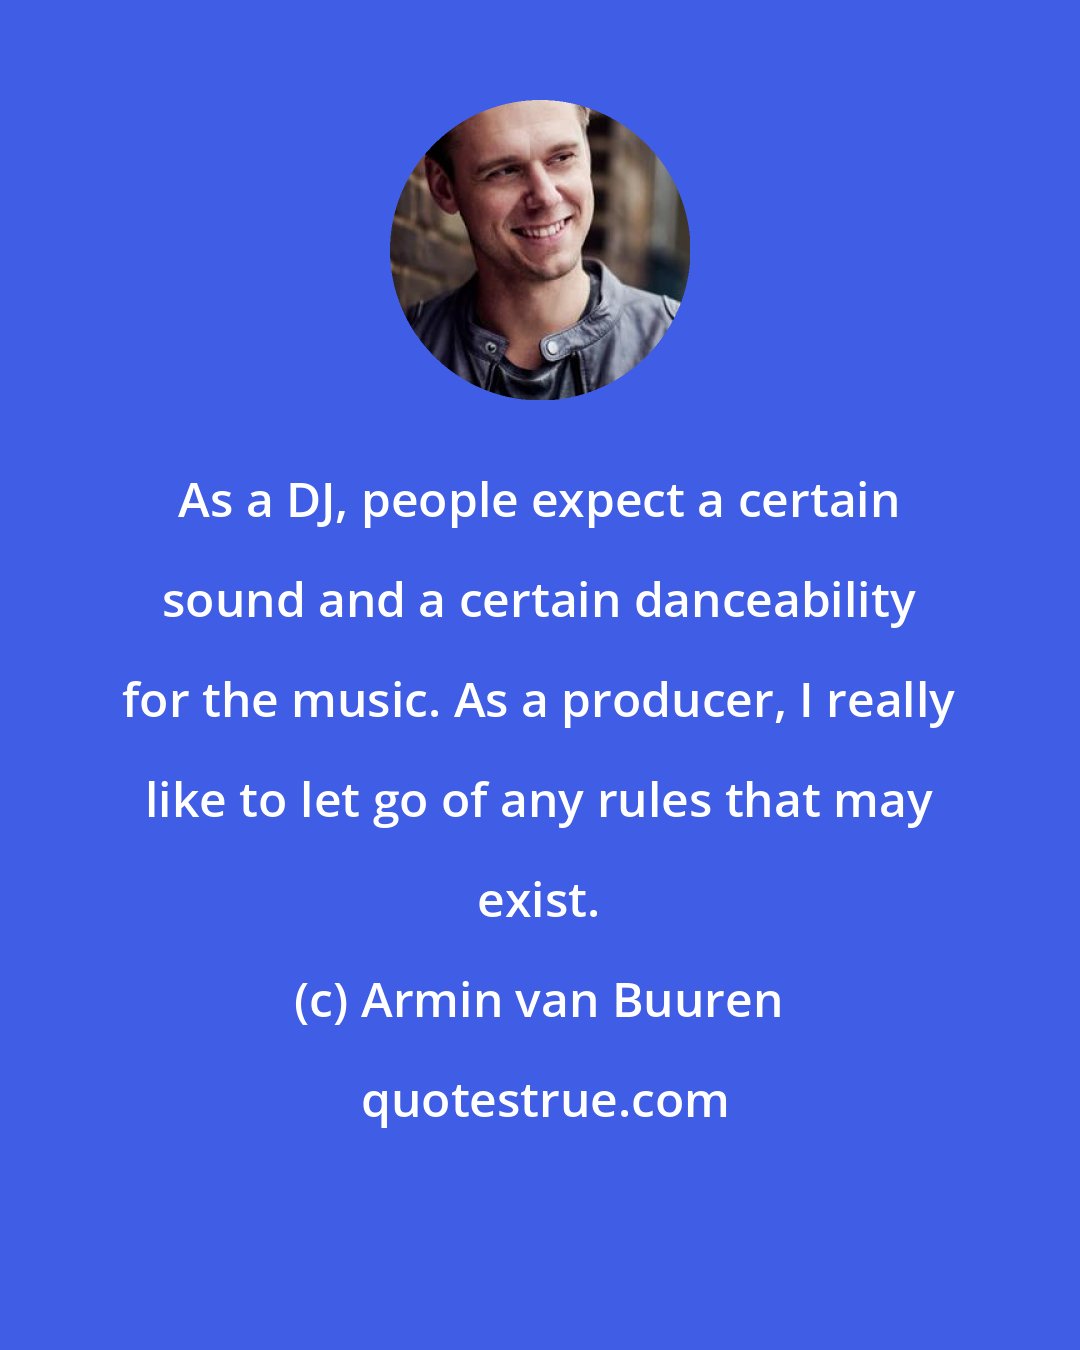 Armin van Buuren: As a DJ, people expect a certain sound and a certain danceability for the music. As a producer, I really like to let go of any rules that may exist.